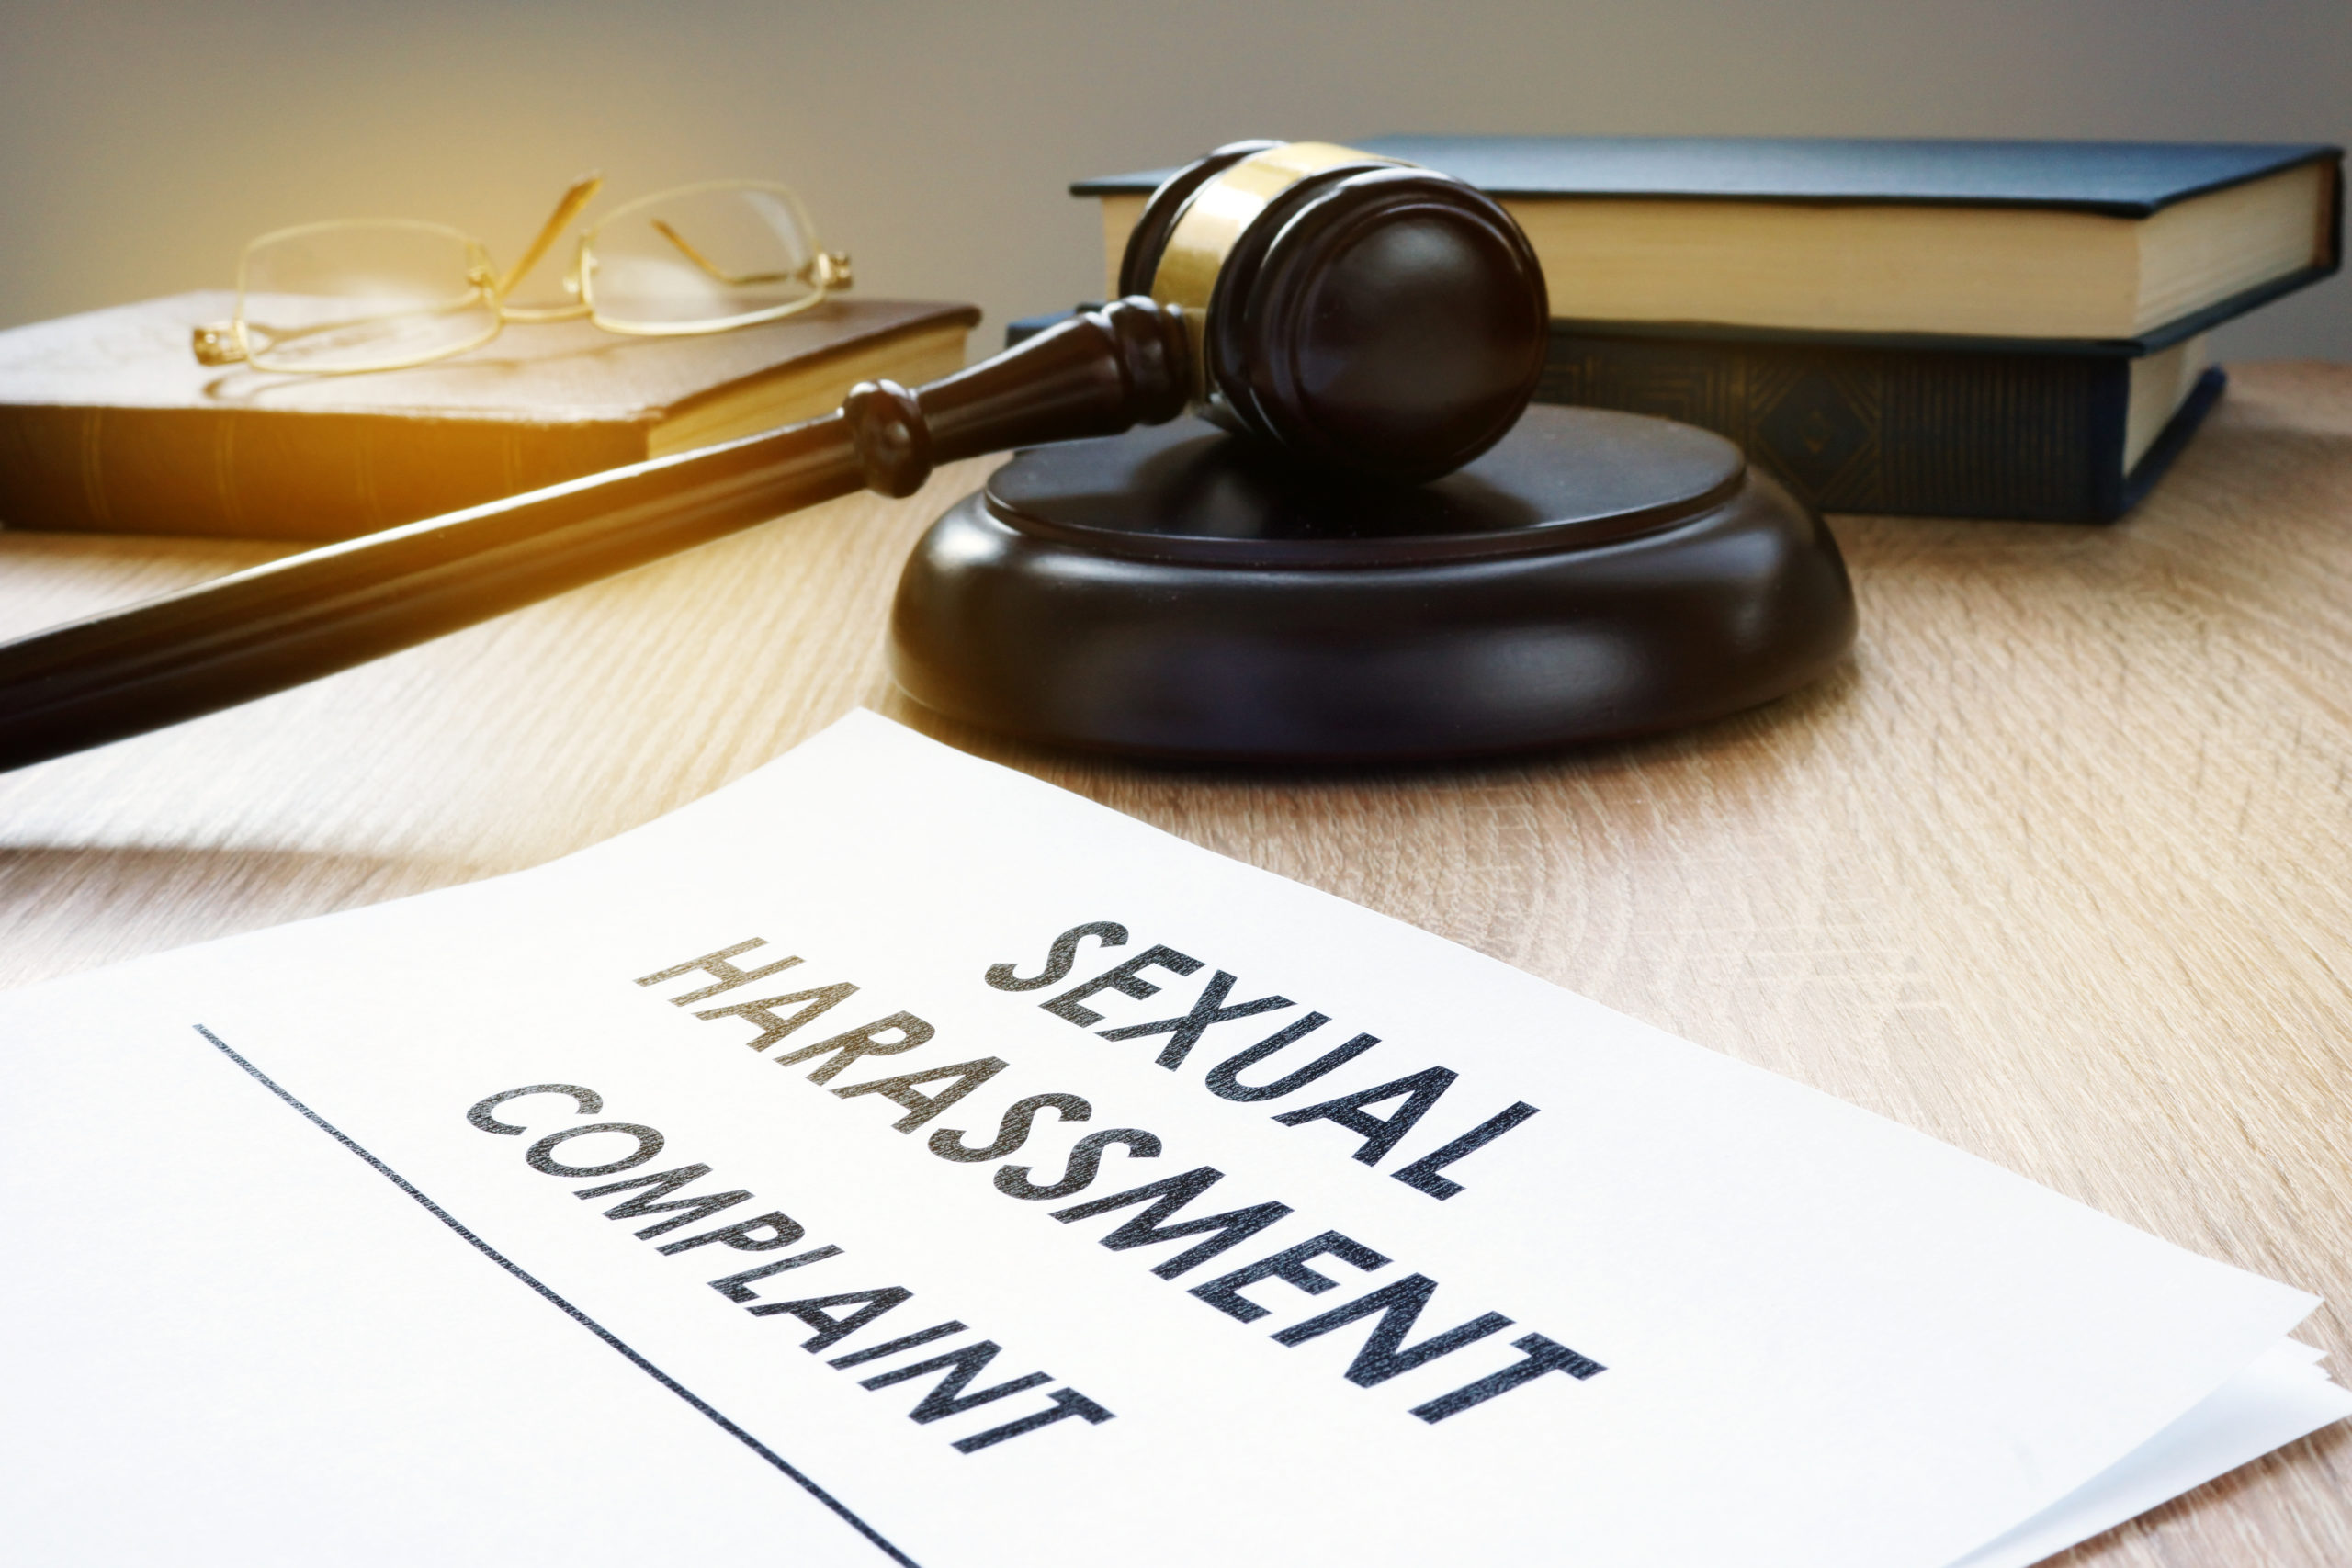 Handling sexual harassment risks – Do employers have an obligation to respond to complaints?